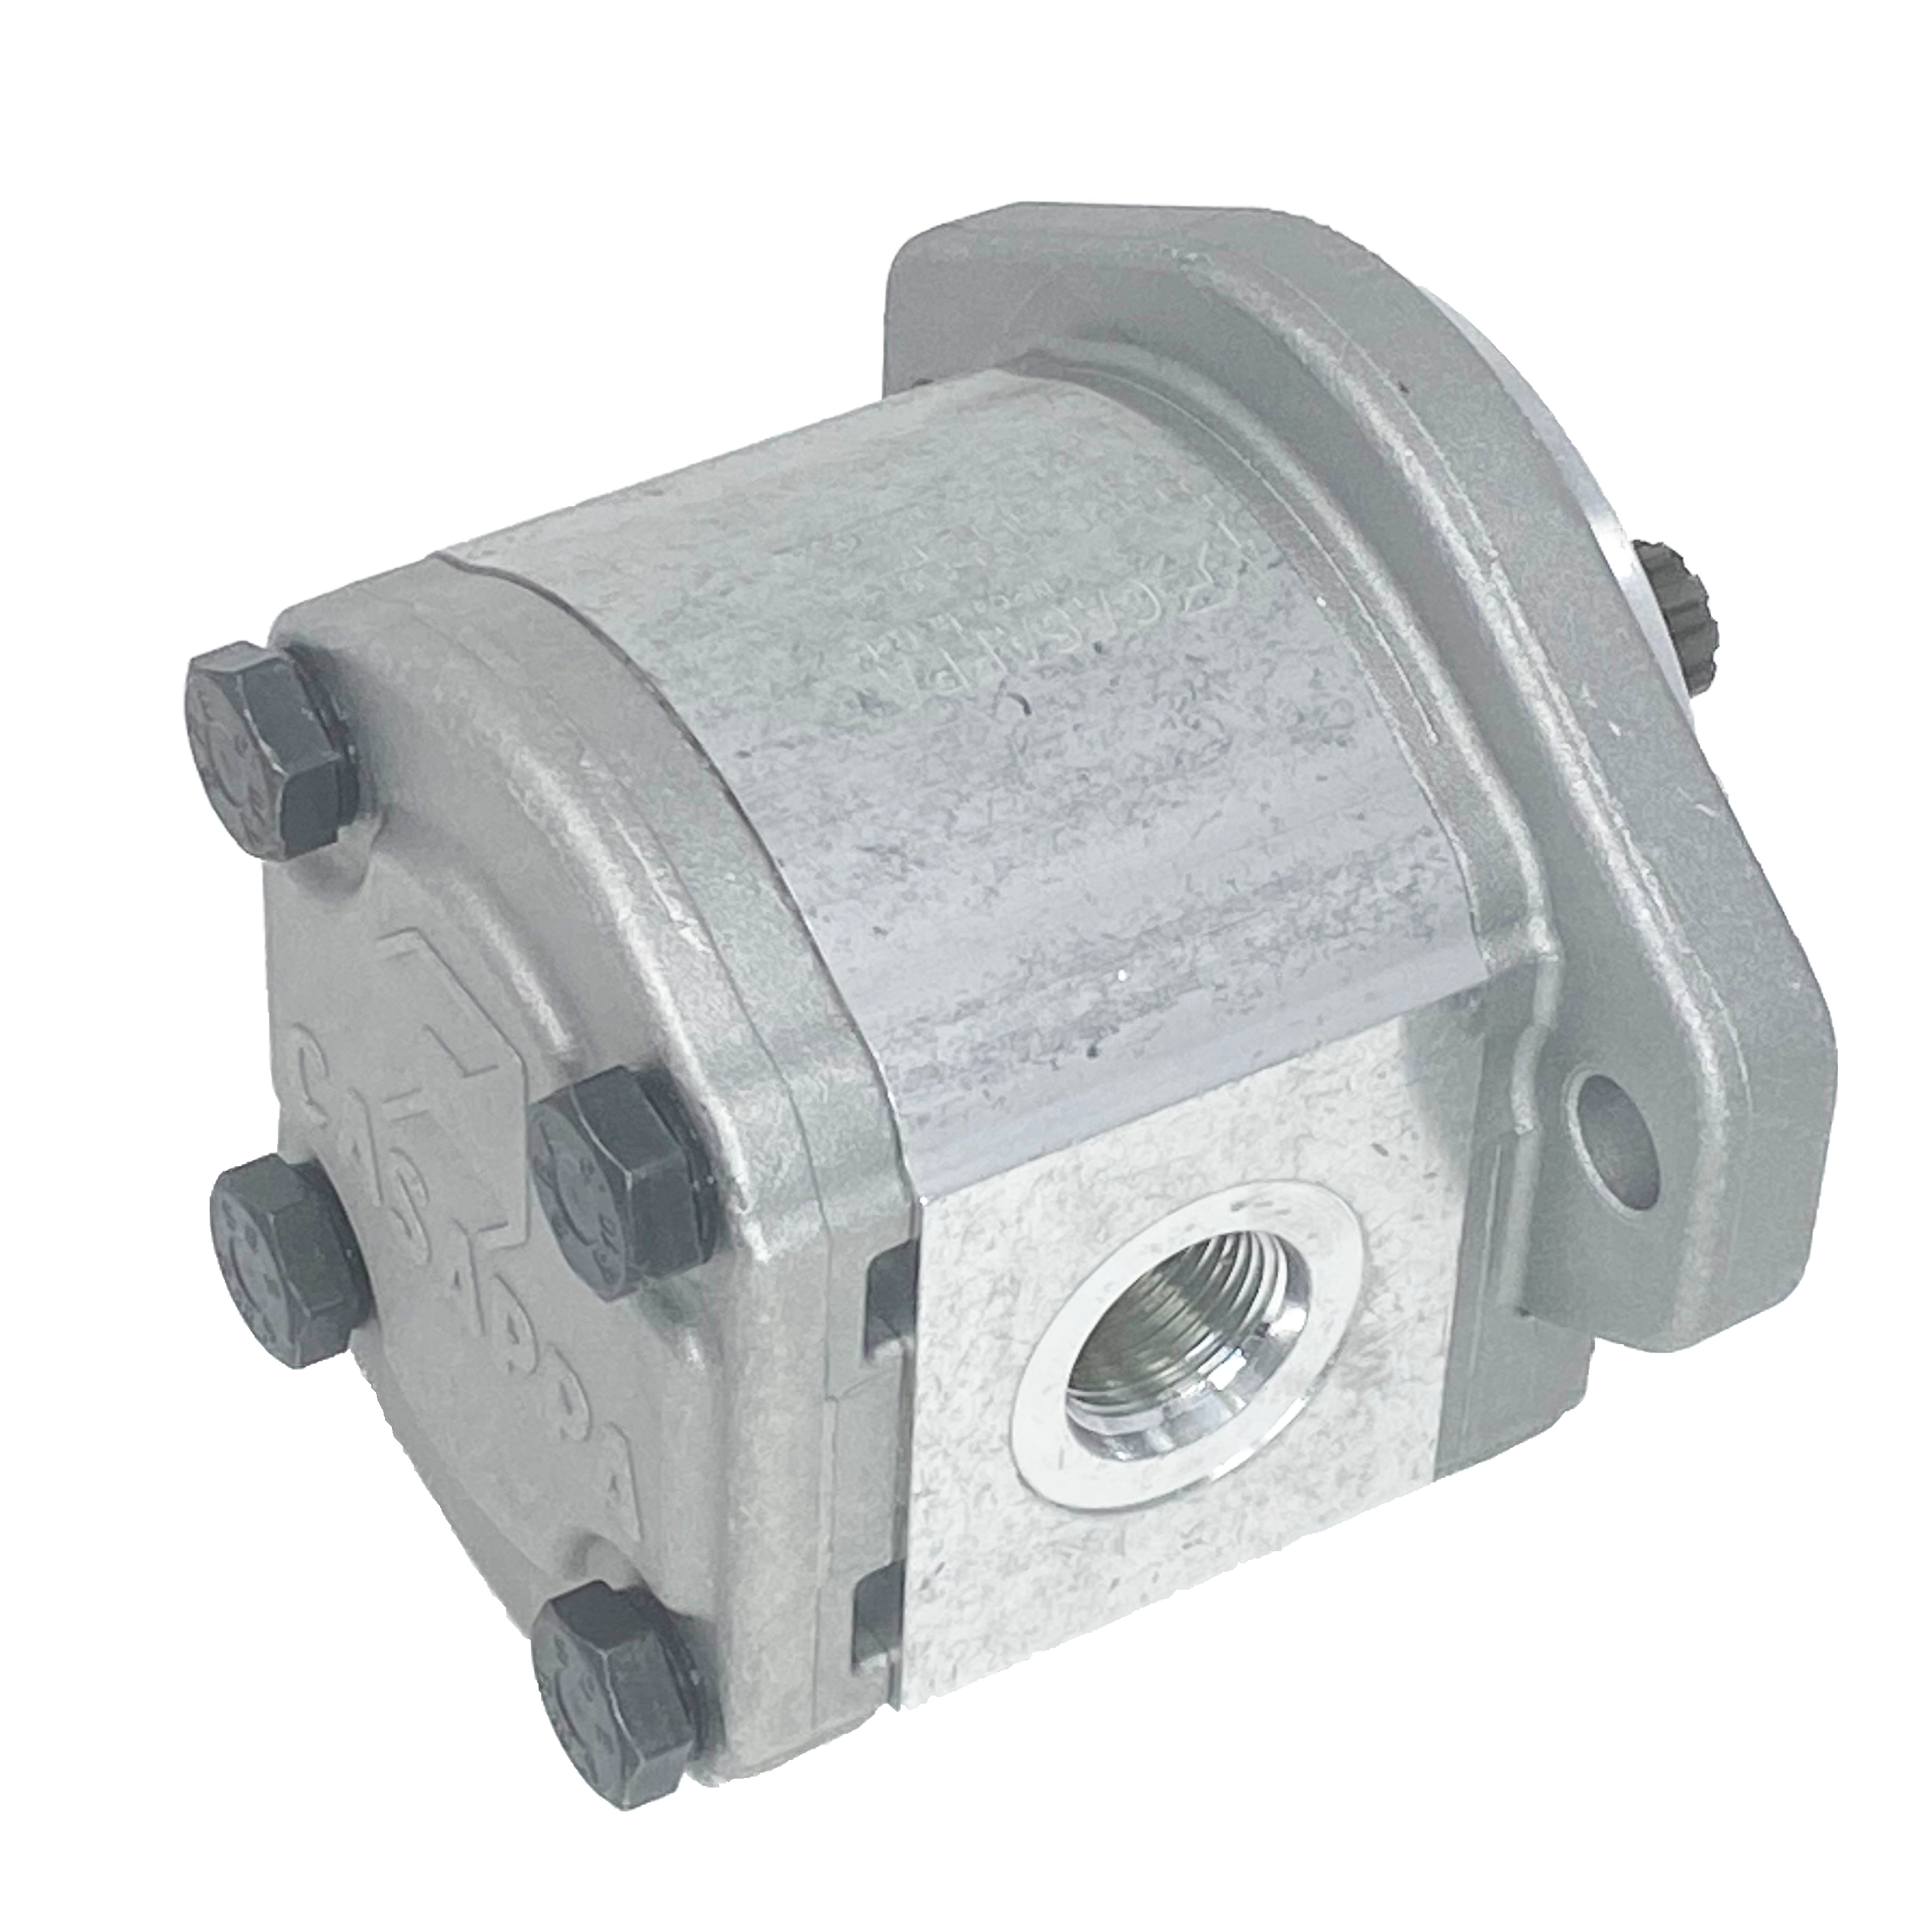 PLP20.8S0-31S1-LOF/OC-S7-N-EL-FS : Casappa Polaris Gear Pump, 8.26cc, 3625psi Rated, 3500RPM, CCW, 5/8" Keyed Shaft, SAE A 2-Bolt Flange, 1" #16 SAE Inlet, 0.625 (5/8") #10 SAE Outlet, Aluminum Body & Flange